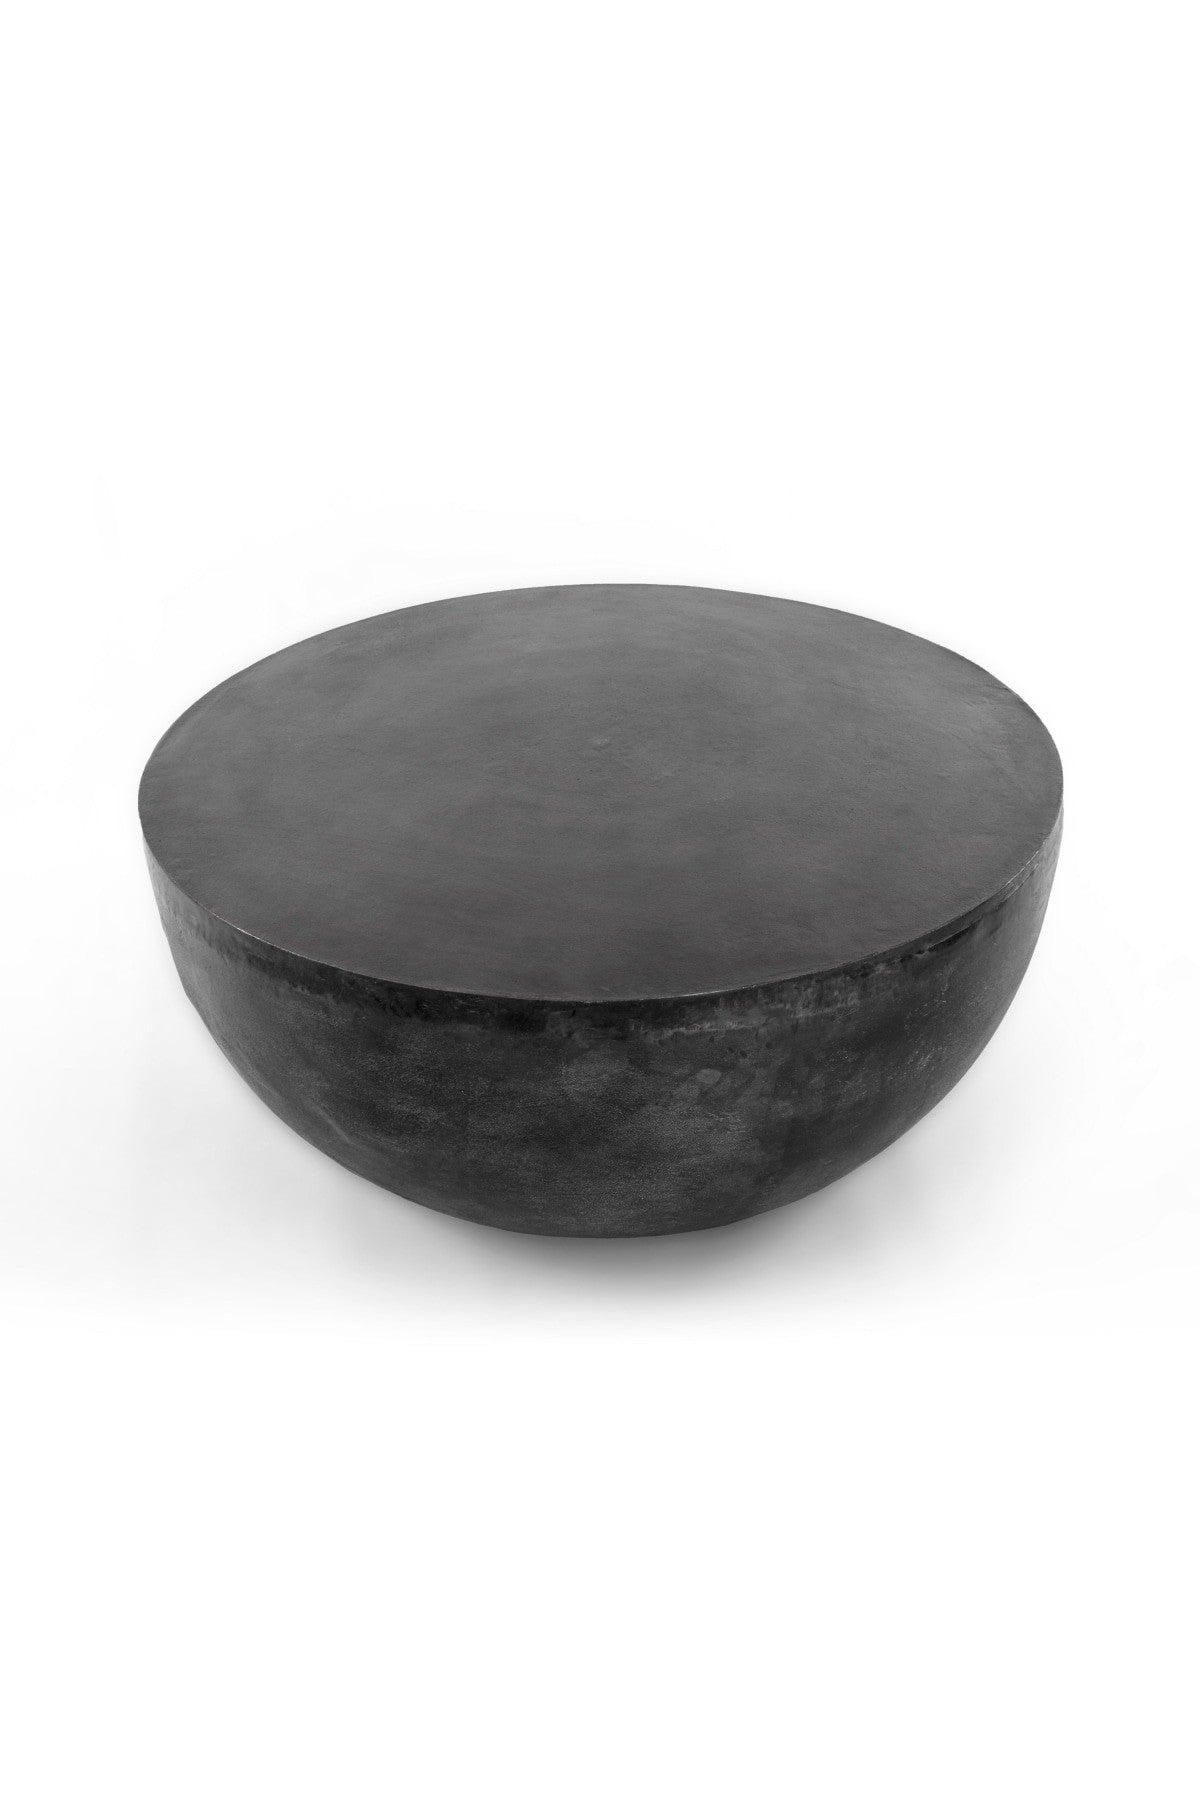 Bastille Outdoor Round Coffee Table - Aged Grey - 2 Sizes